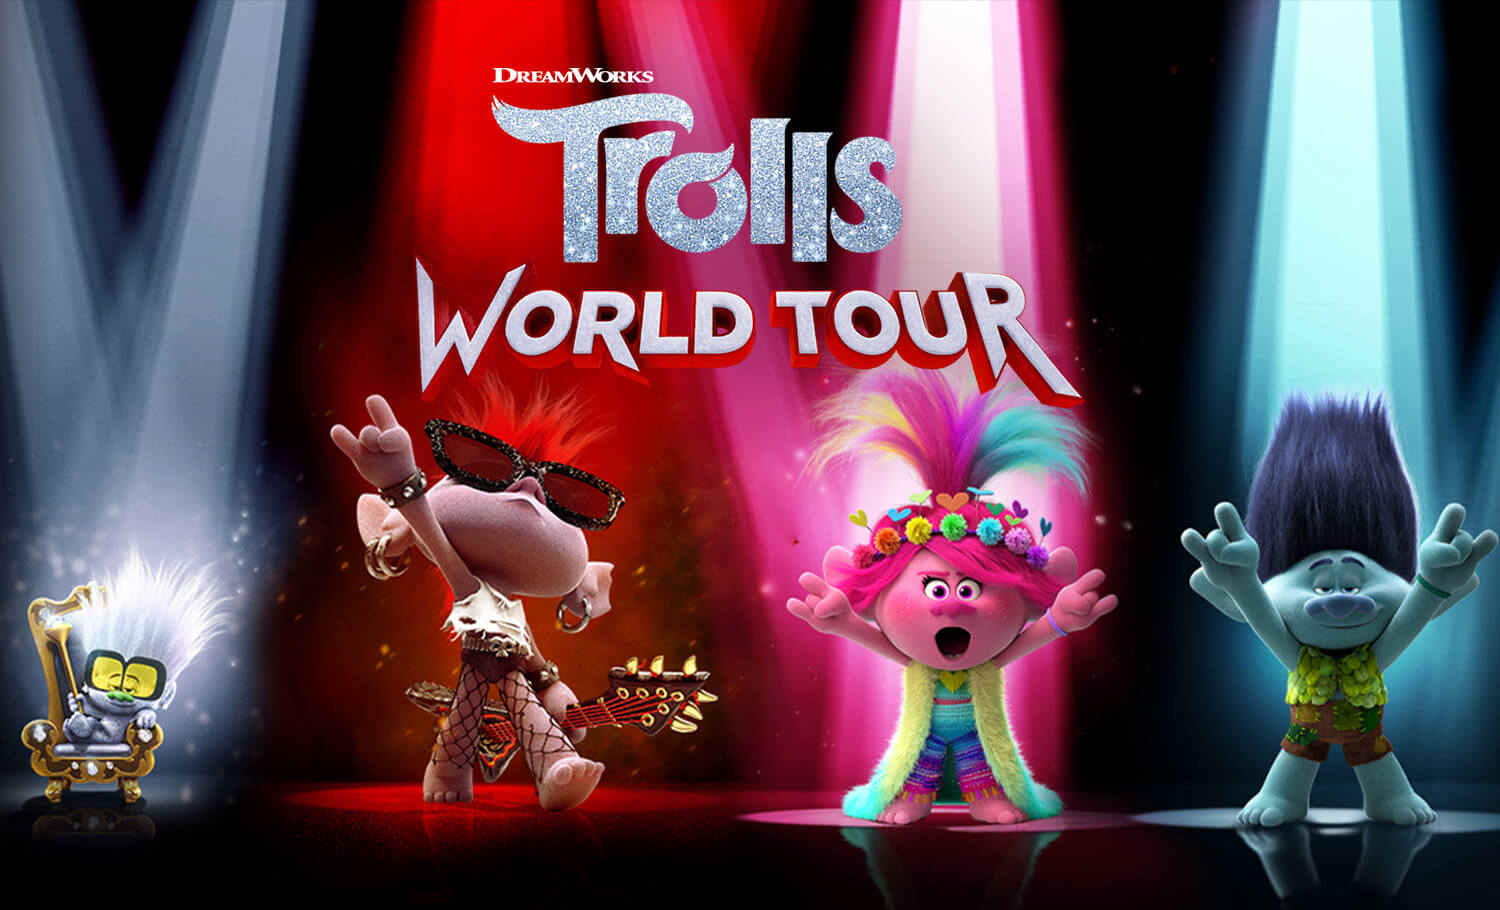 You Can Watch 'Trolls World Tour' at Home Now - Here's How!: Photo 4453497  | Anna Kendrick, Justin Timberlake, Movies, Trolls World Tour Photos | Just  Jared: Entertainment News